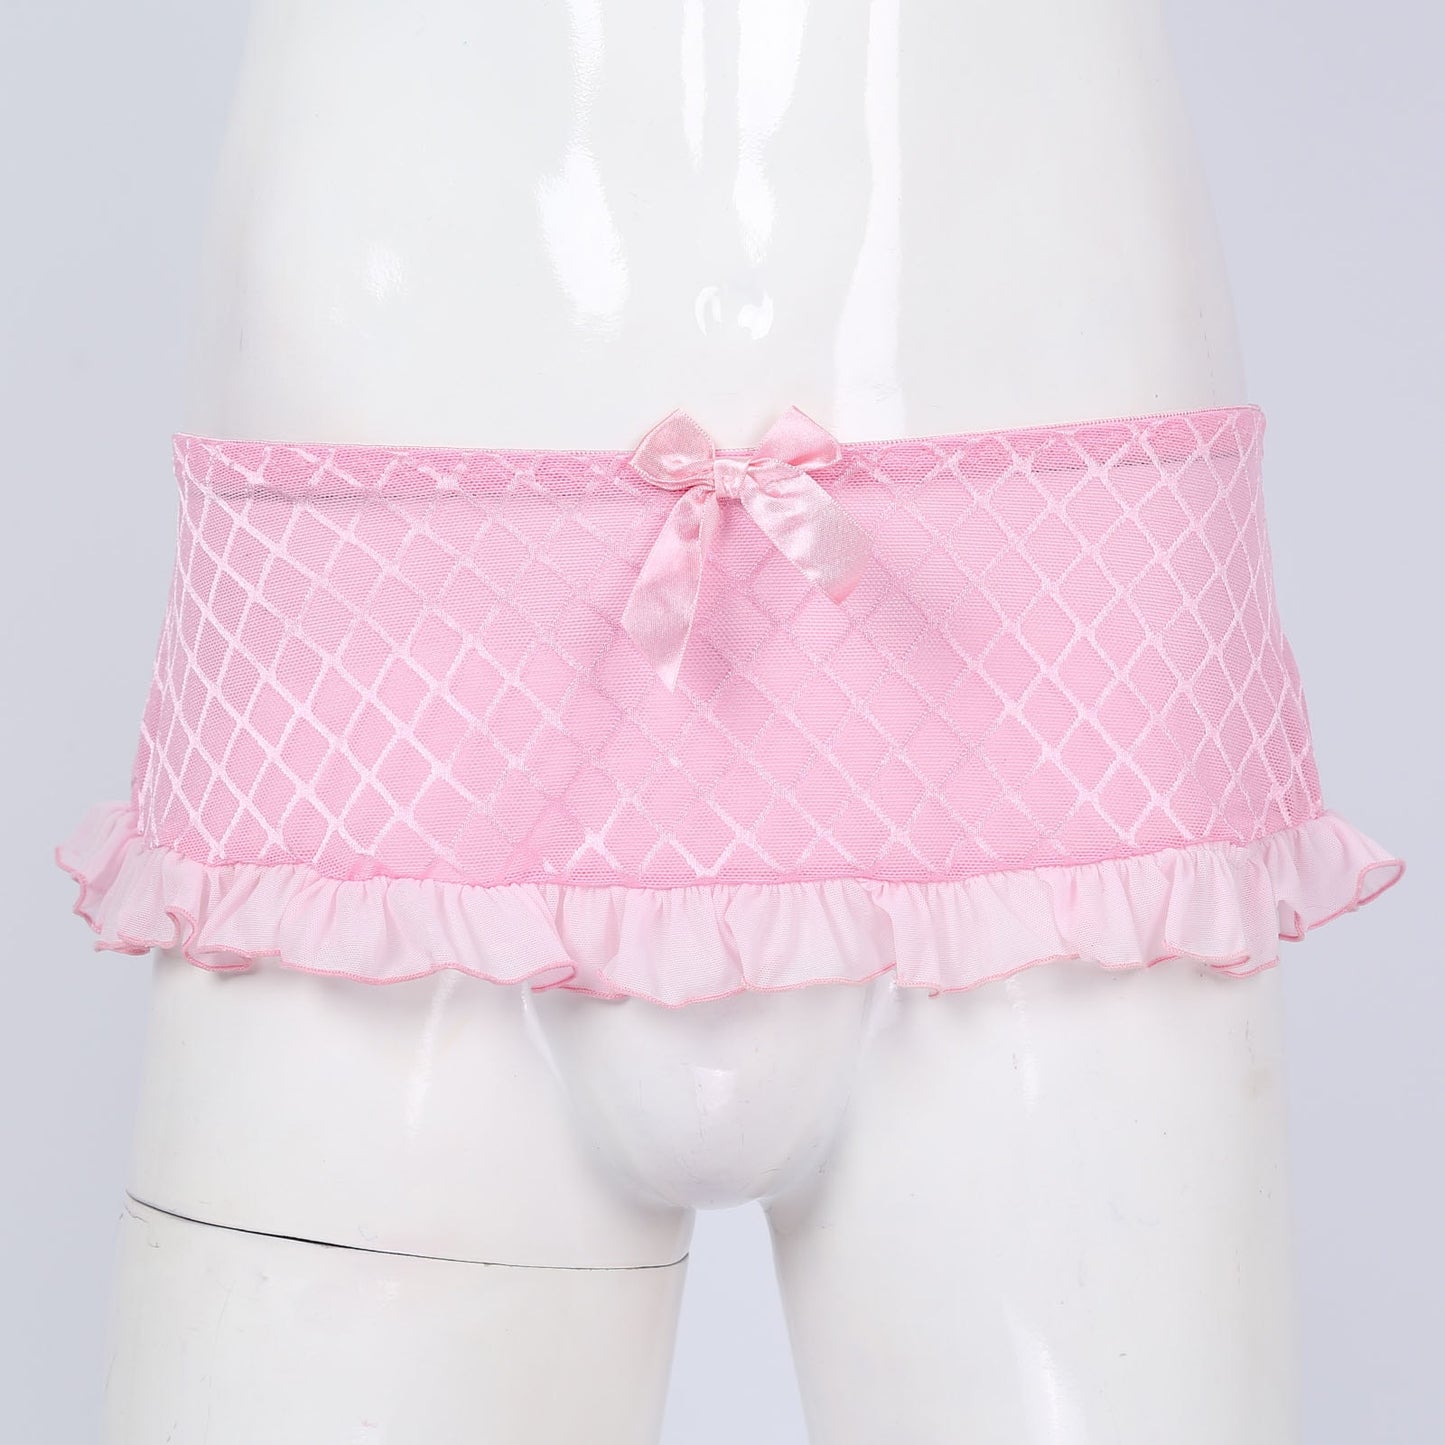 Sissy Lingerie with Lace: Sexy Underwear for Crossdressers